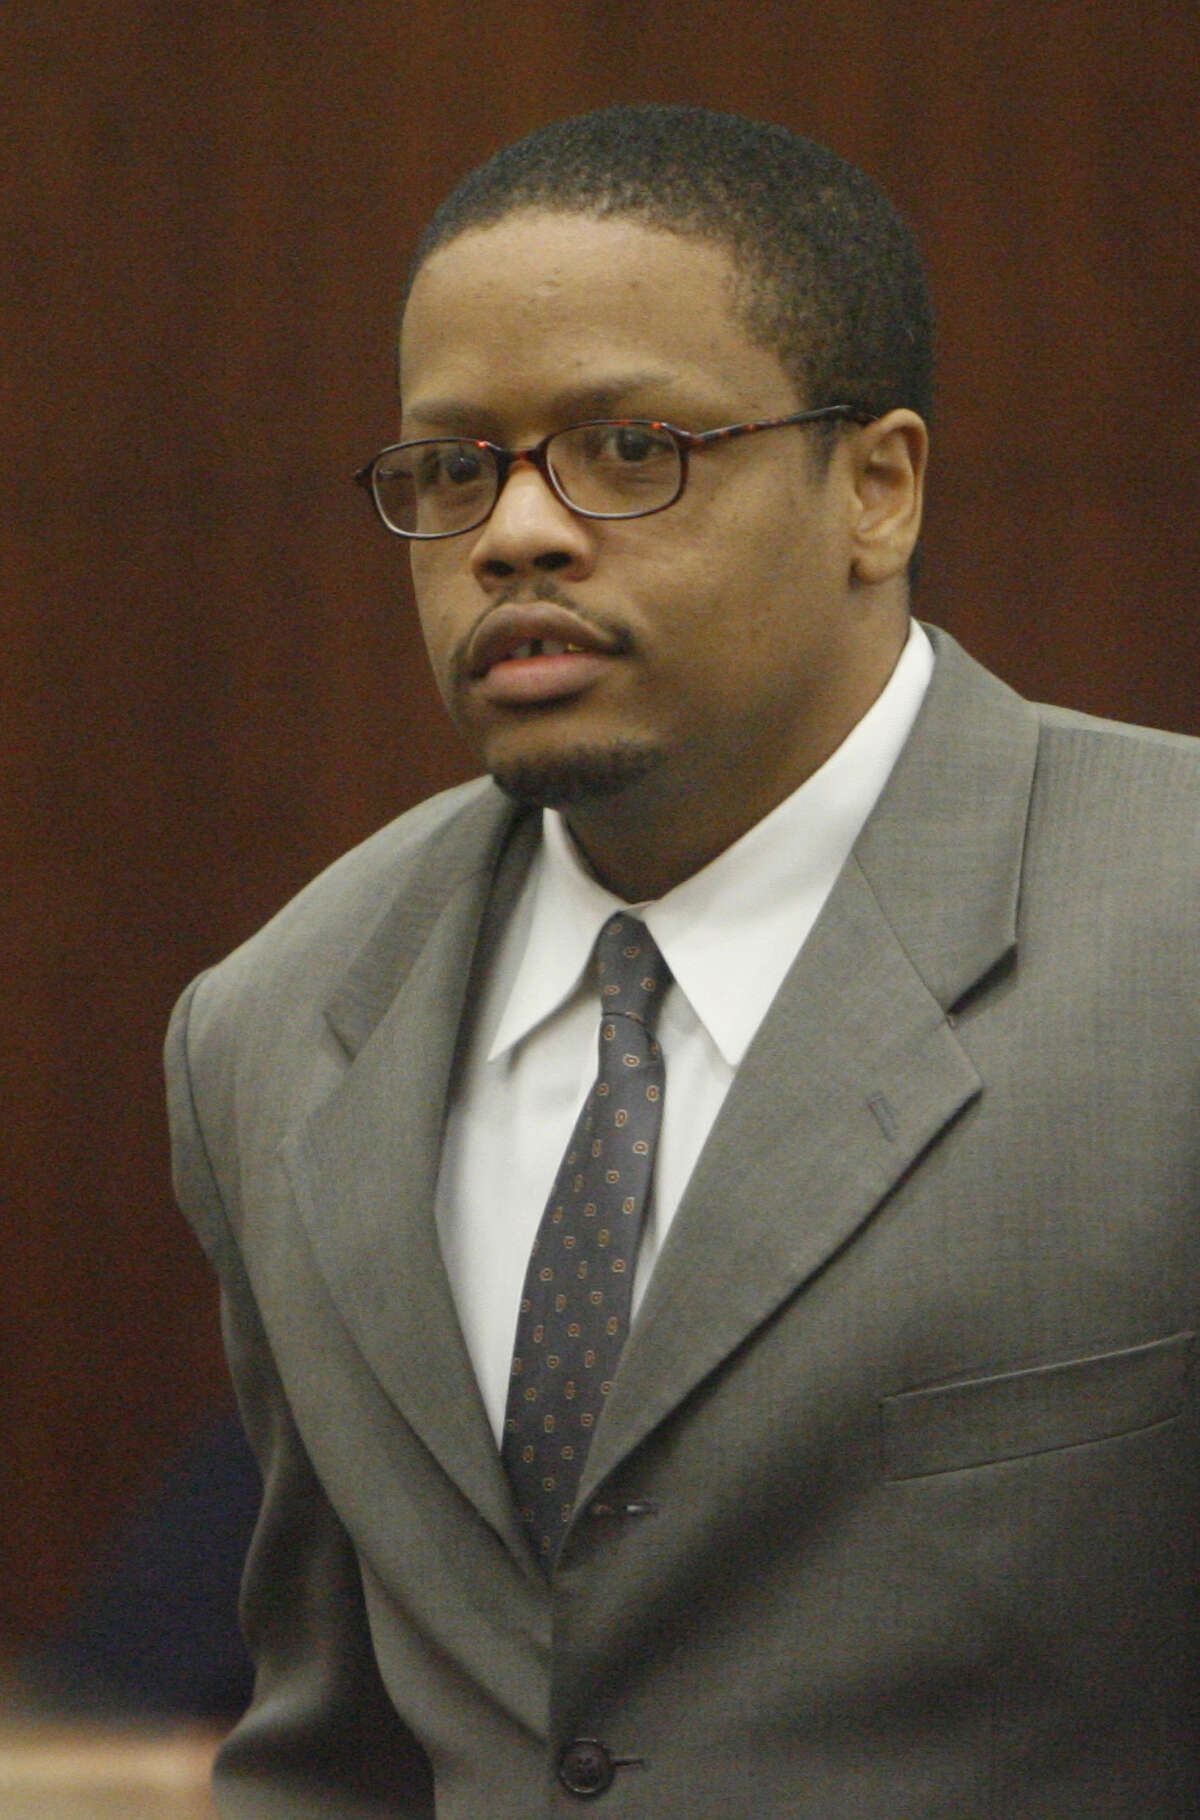 Howard Guidry was convicted twice in trials in which the prosecutor was Kelly Siegler.